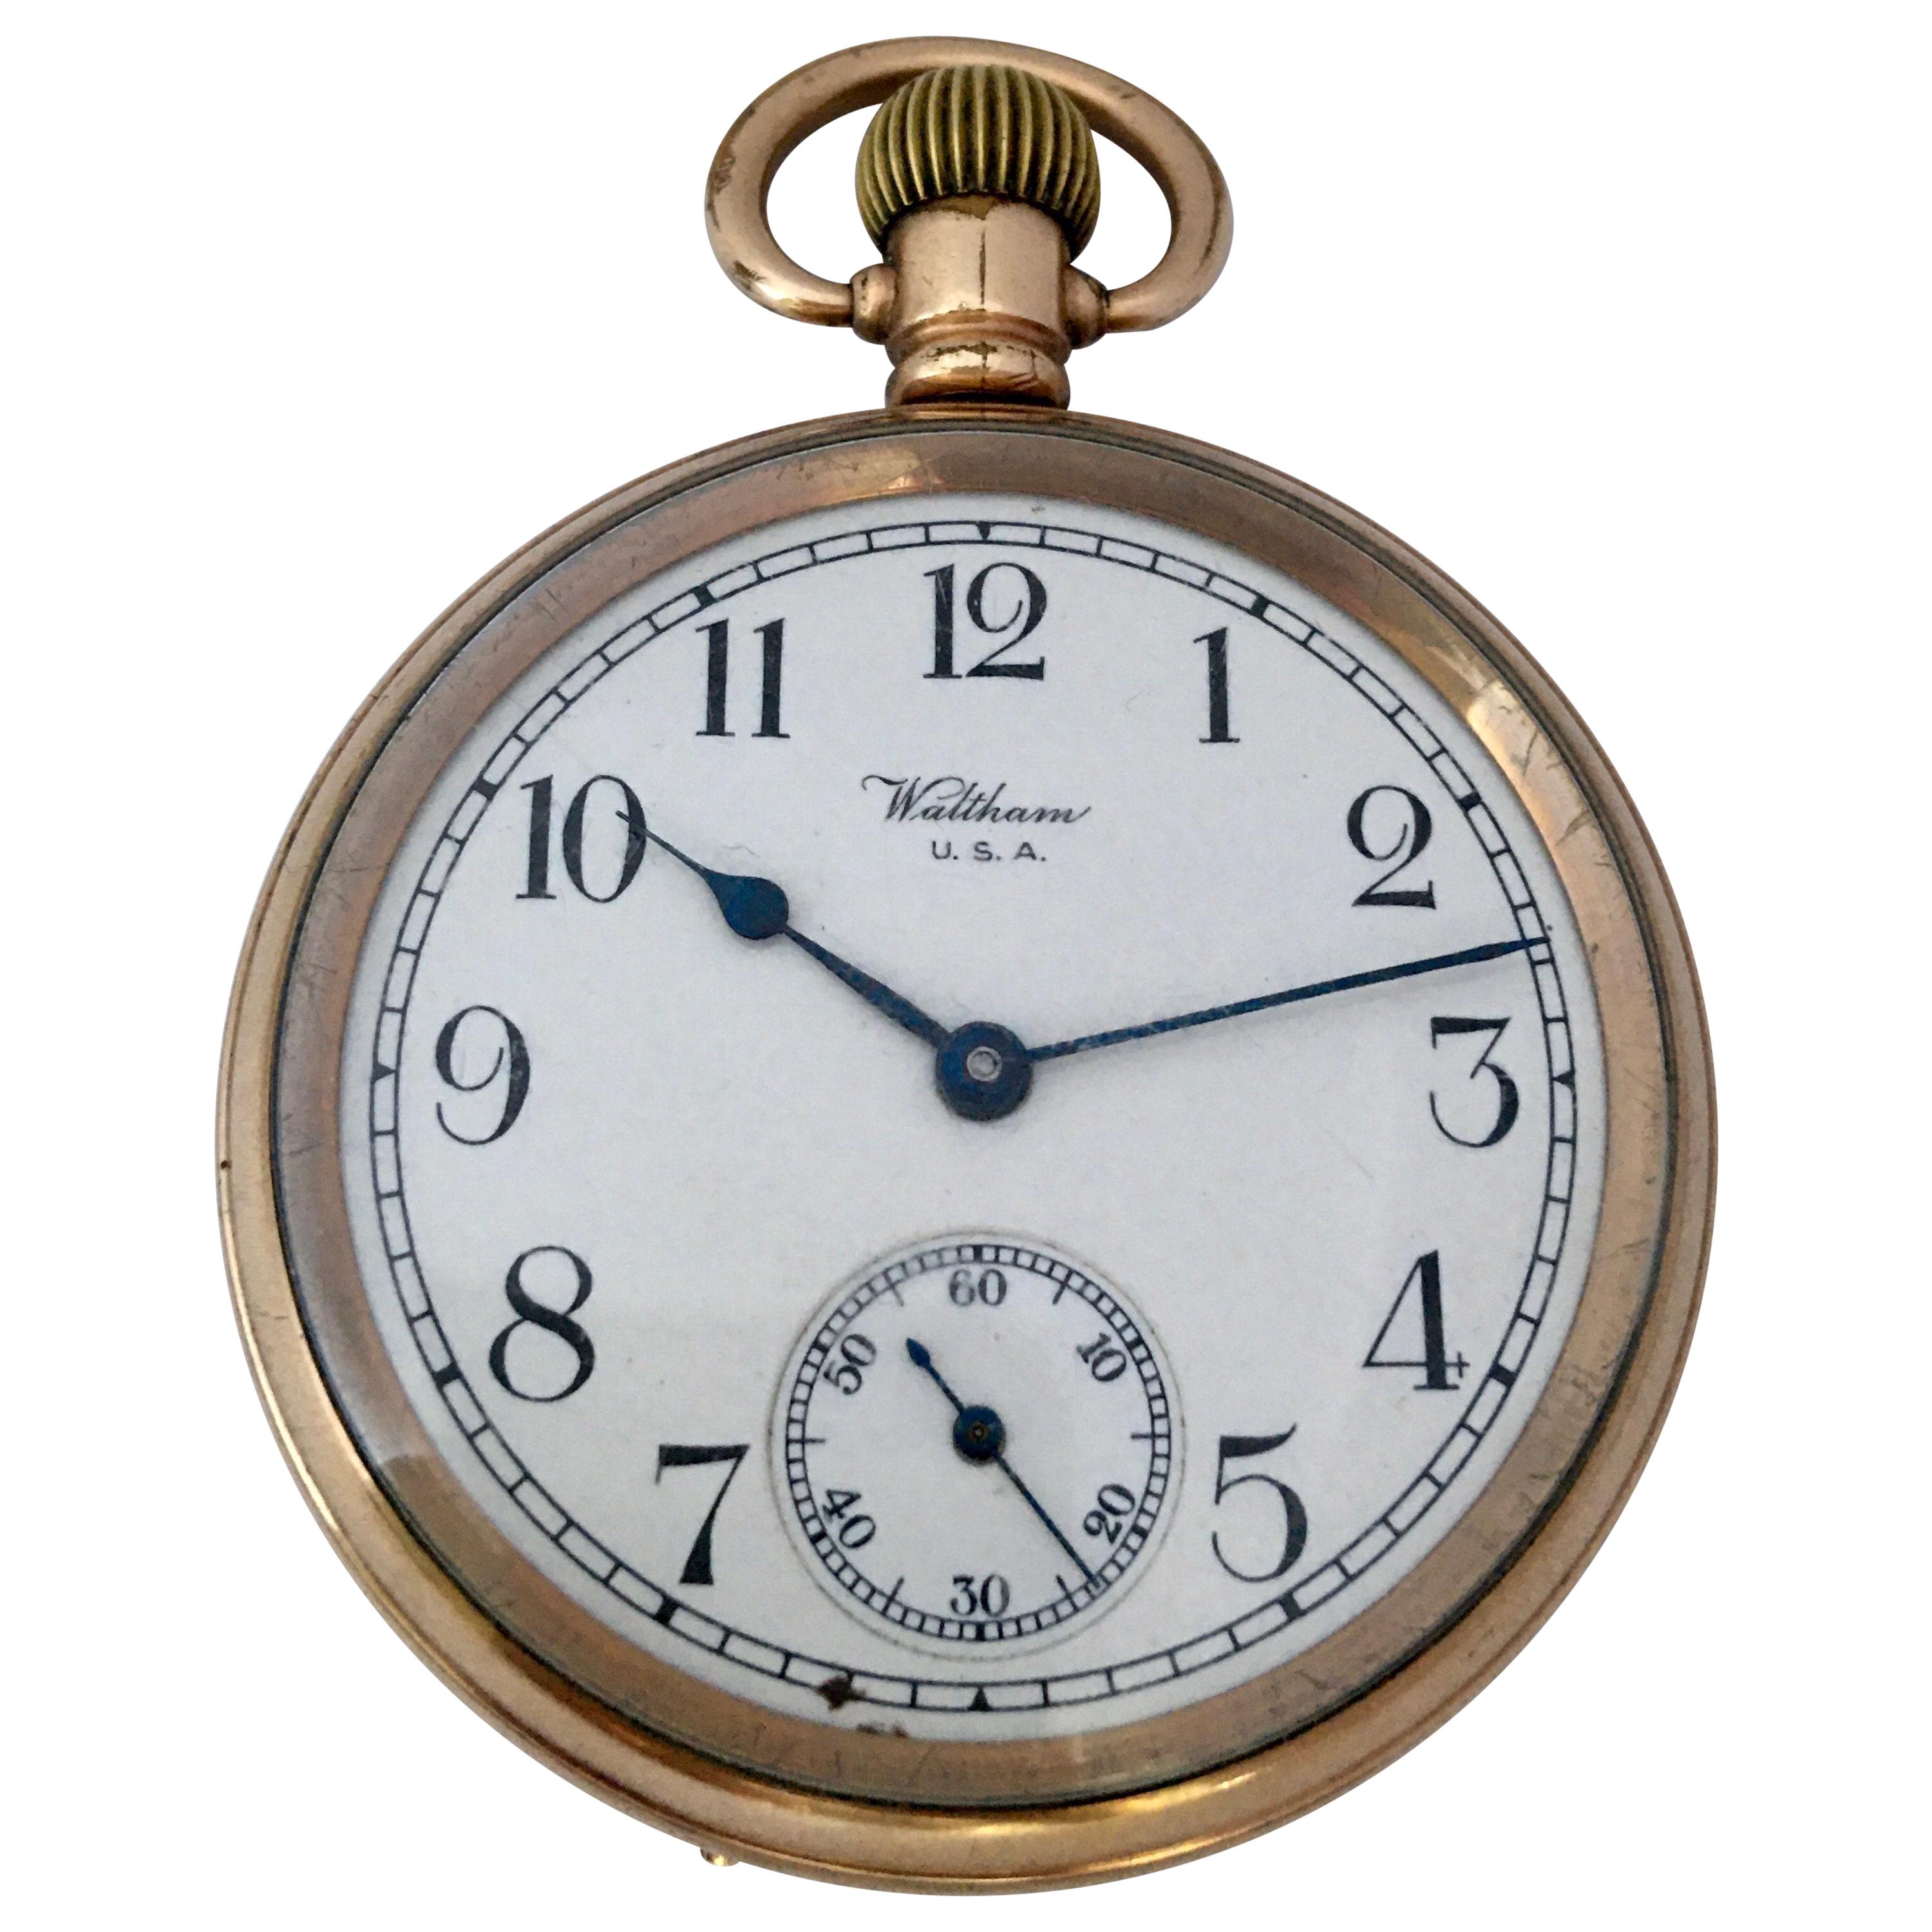 Antique Gold-Plated Dennison Case Waltham U.S.A Hand-Winding Pocket Watch For Sale